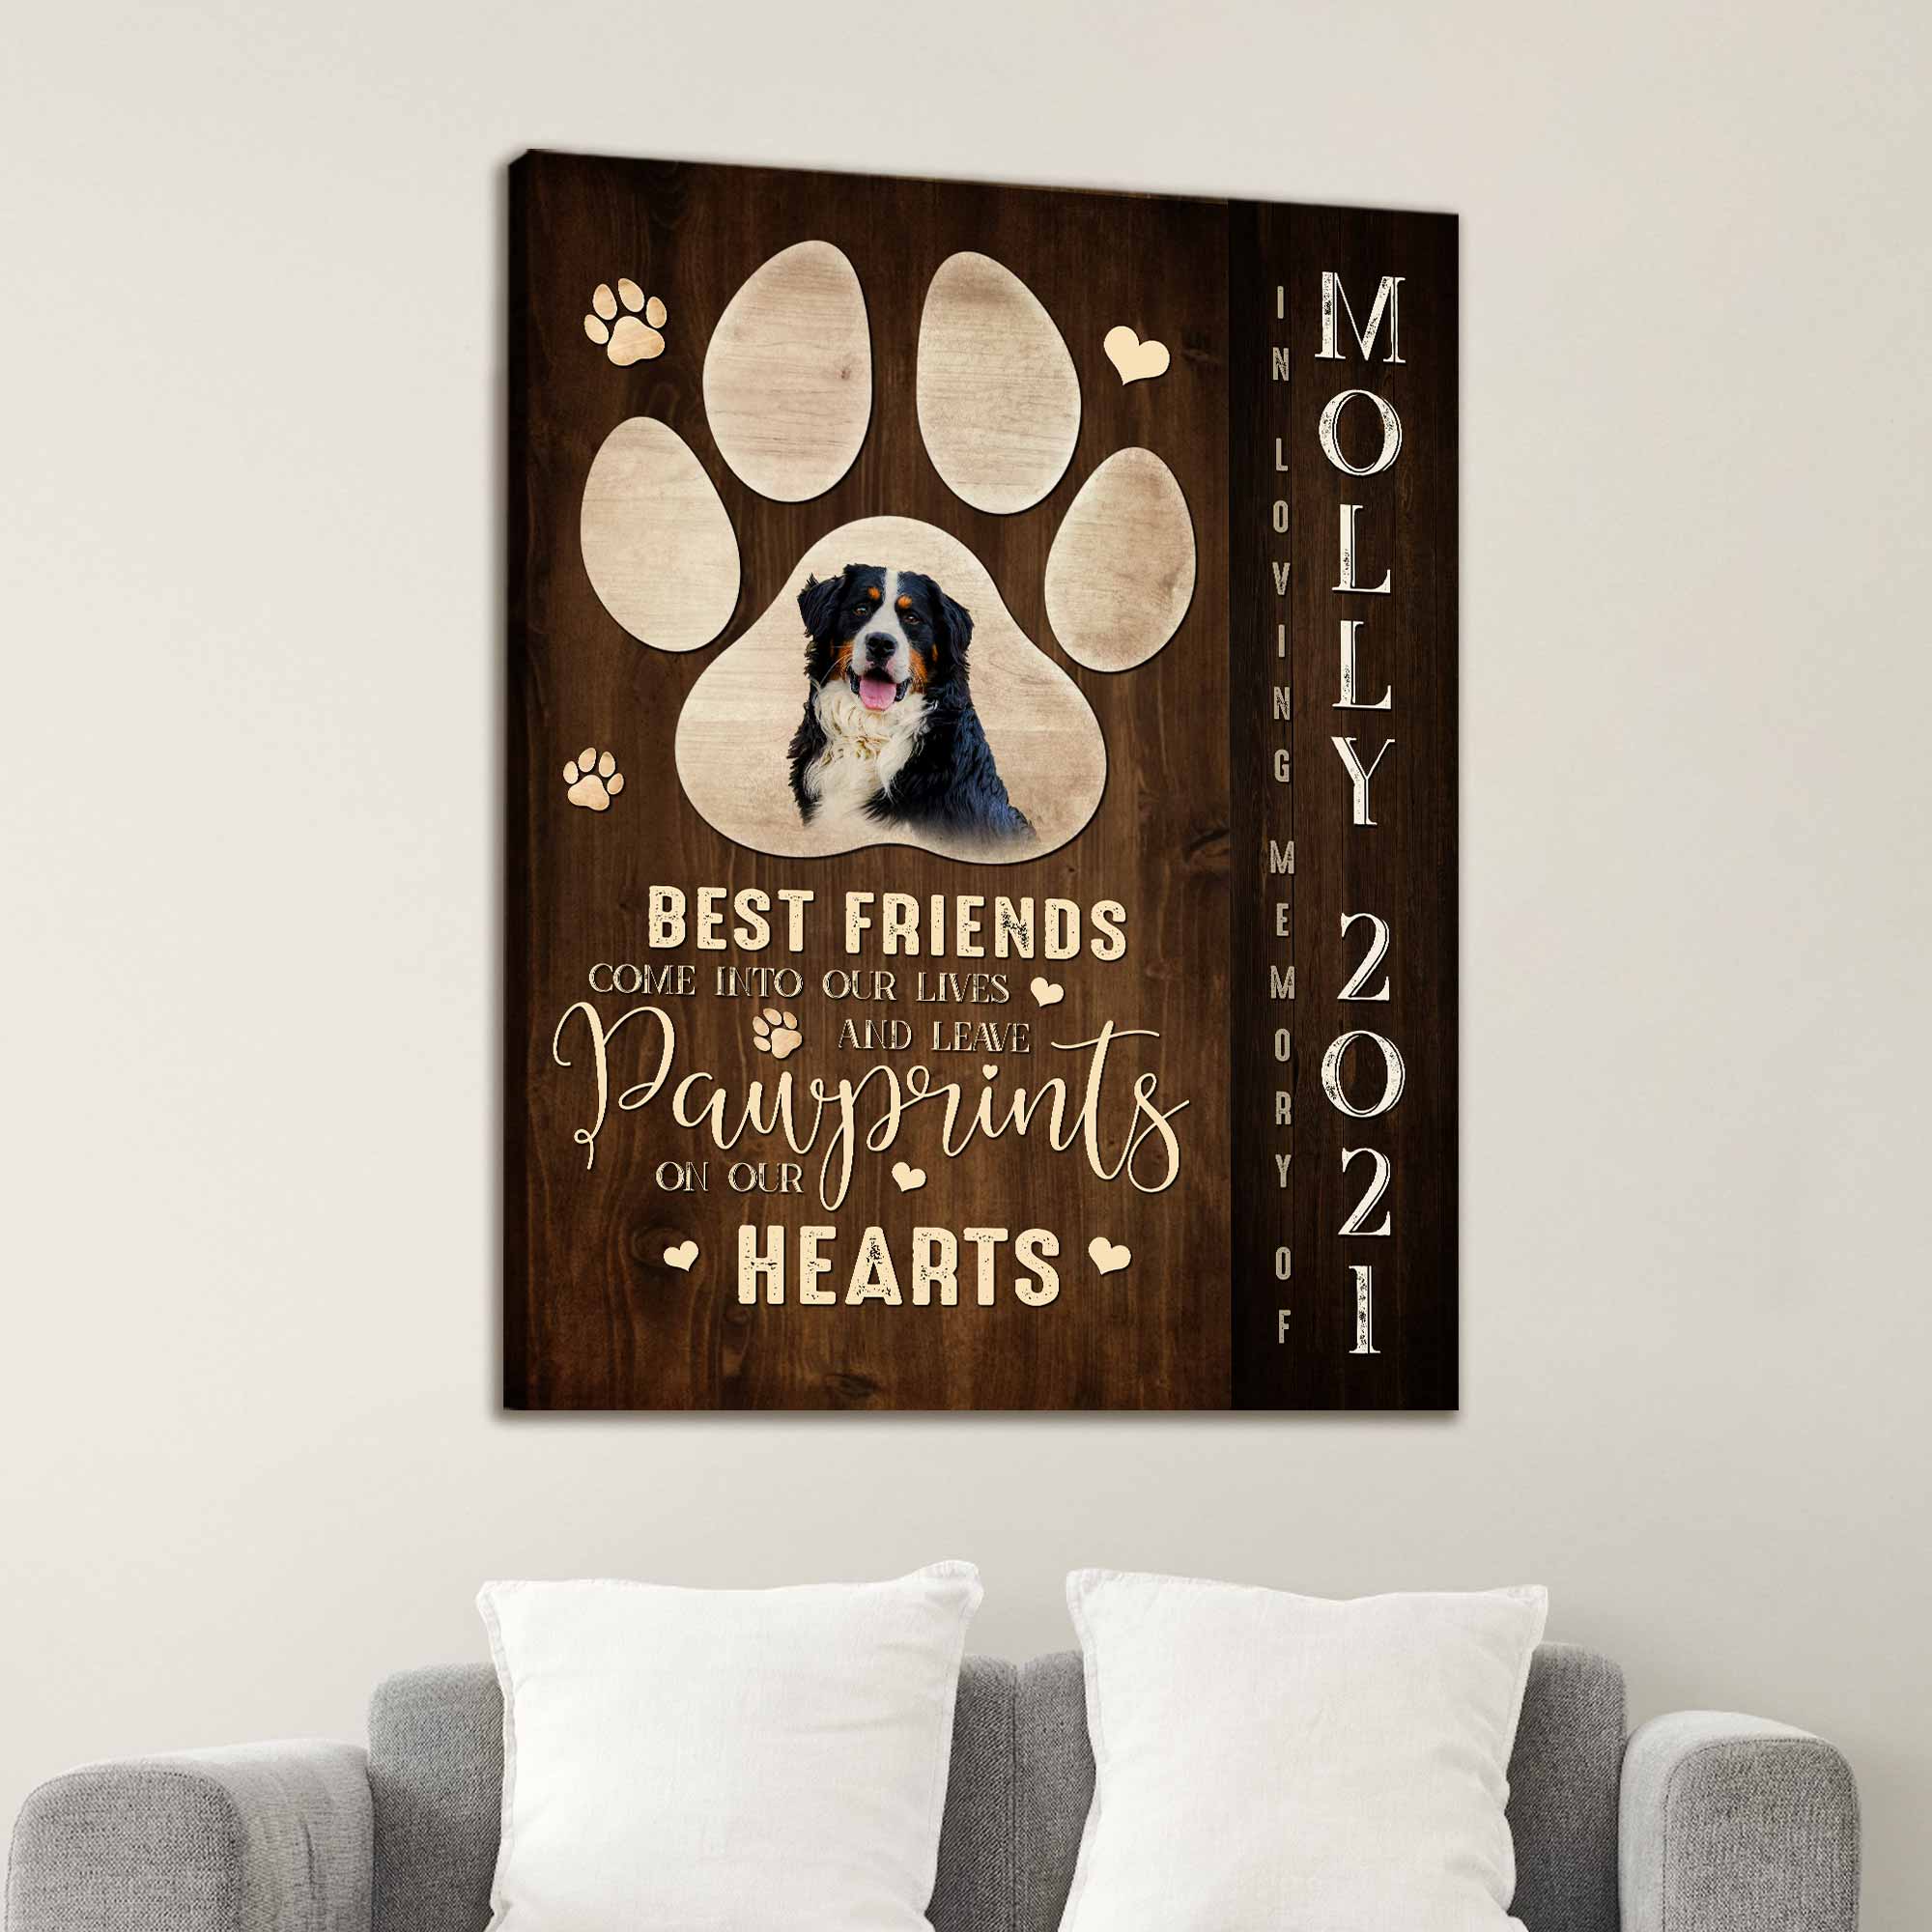 Dog Memorial Gift Ideas, Dog Passing Away Gifts, Sympathy Gifts for Pet Loss, Memorial Canvas Photos